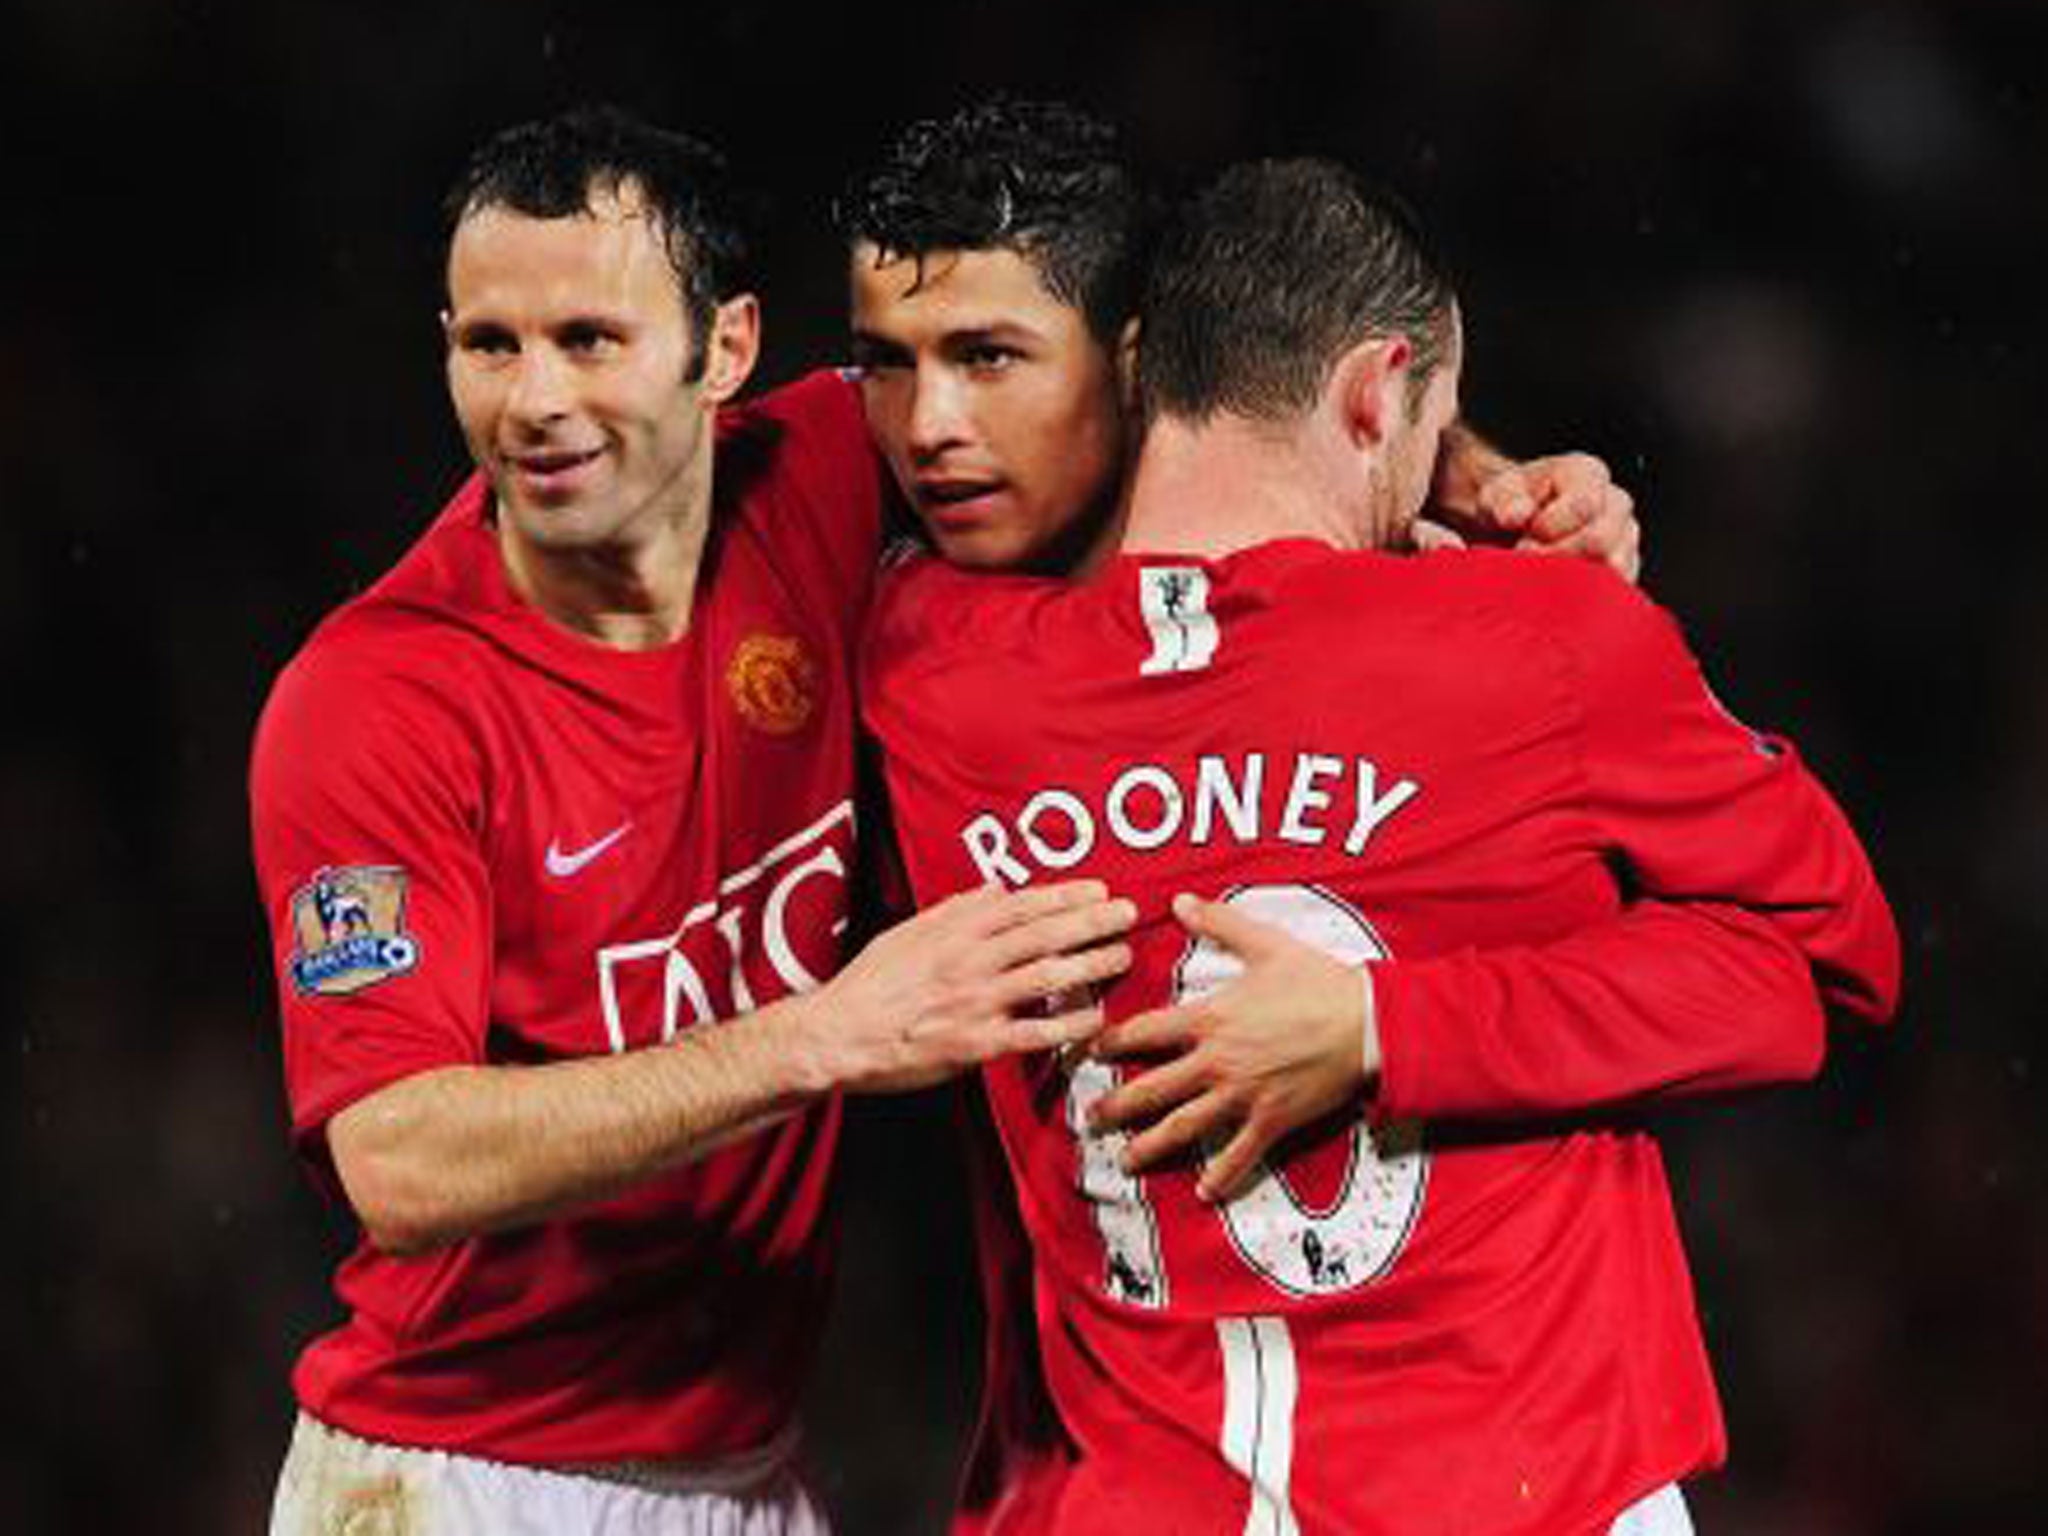 Could Ryan Giggs, Cristiano Ronaldo and Wayne Rooney be reunited in red next season?